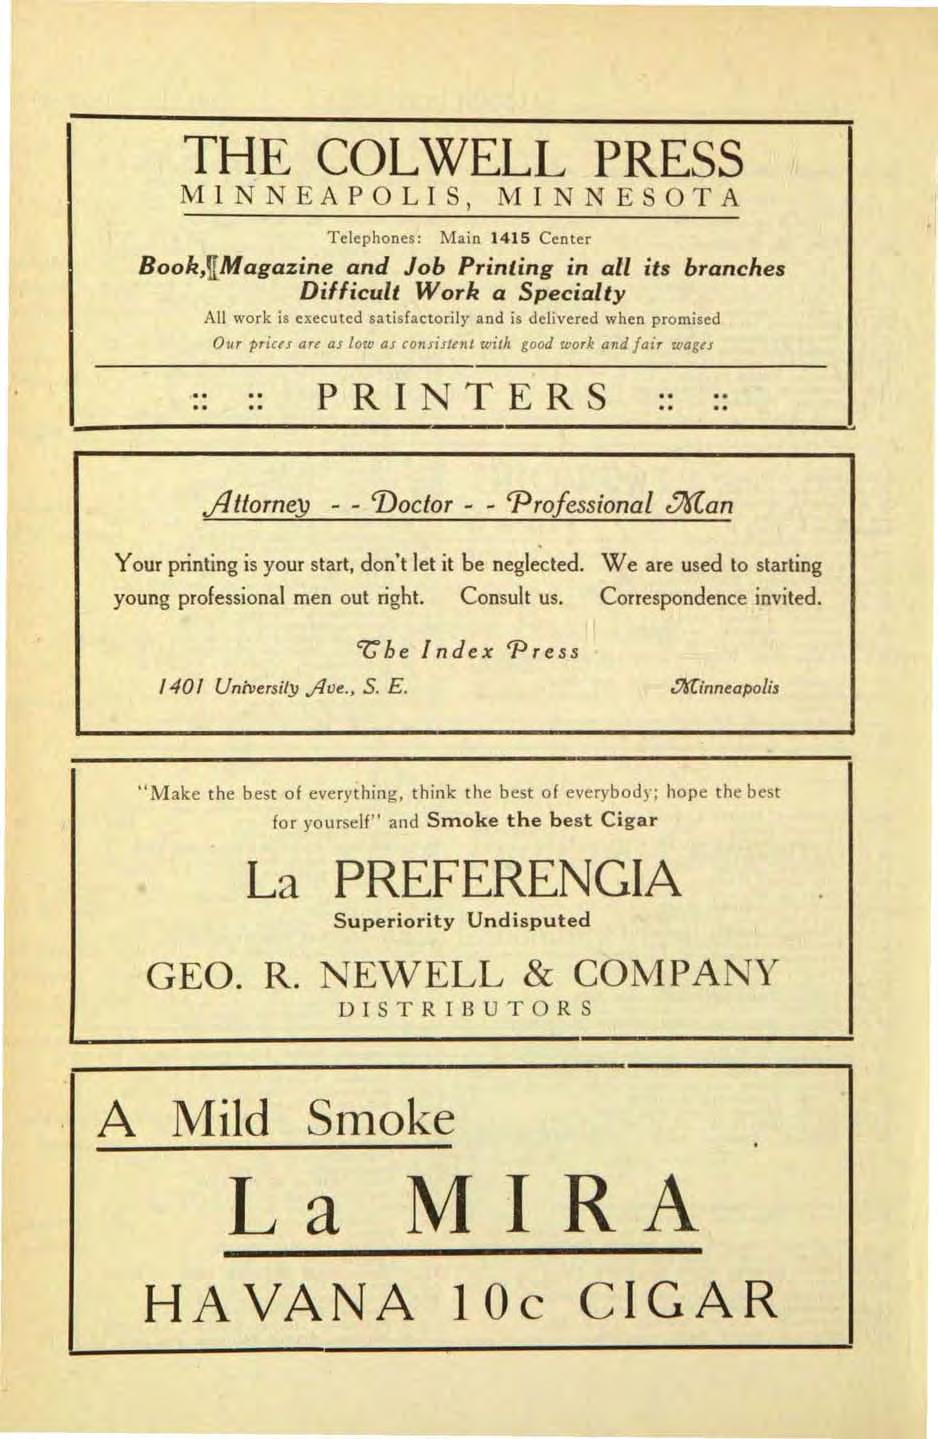 THE COLWELL PRESS MINNEAPOLIS, MINNE TA Telephones: Main 1415 Center Book,Y:Magazine and Job Printing in all its branches Difficult Work a Specialty All work is executed satisfactorily and is